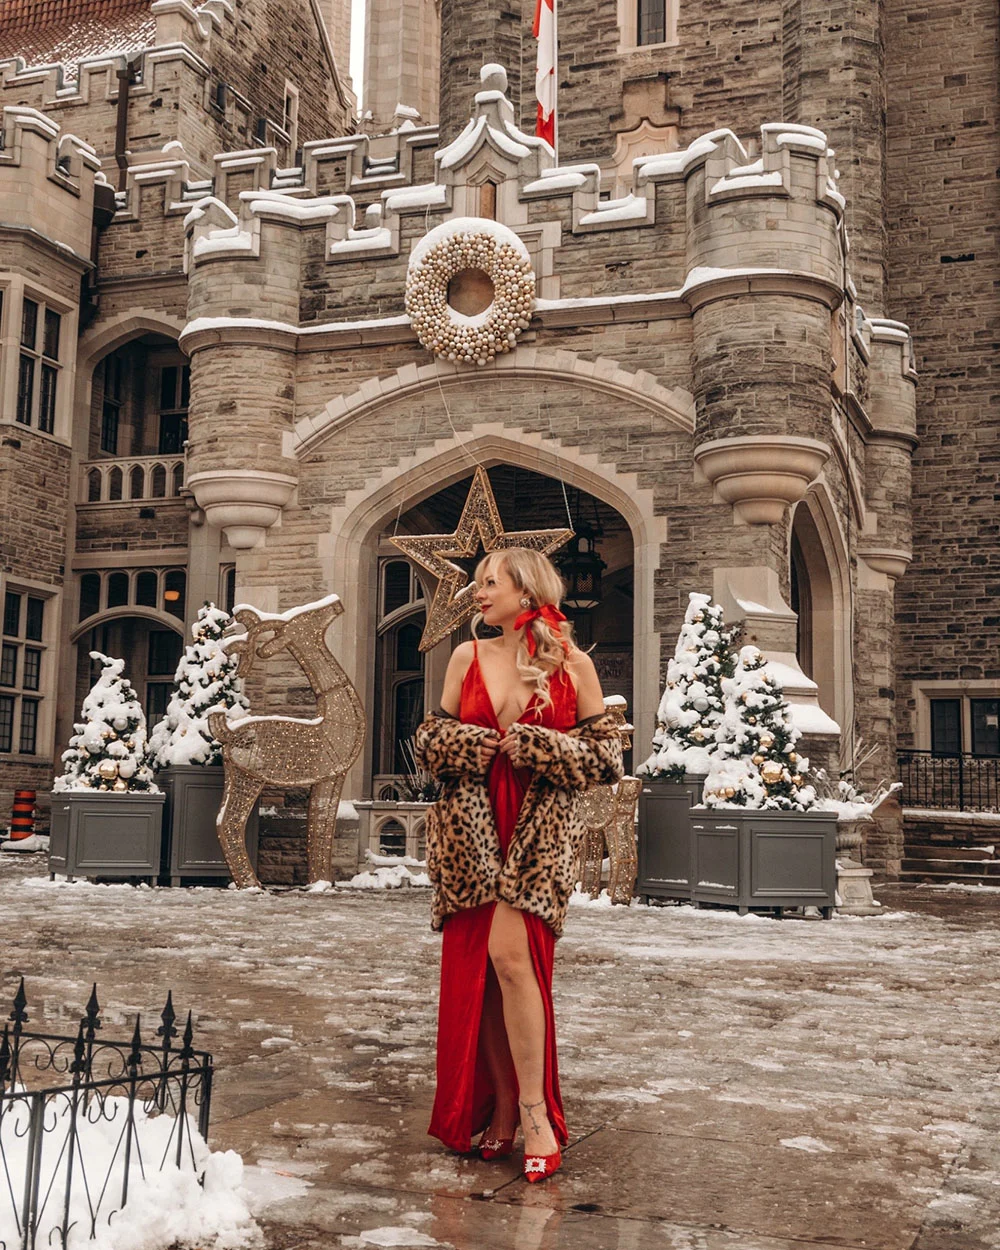 If you're planning on visiting Toronto soon and hoping to get some great photos while you're there, you definitely don't want to miss this guide on the most instagrammable places in Toronto, outdoor edition! This guide features all sorts of incredible outdoor photography locations in Toronto and the GTA. Pictured here: Casa Loma